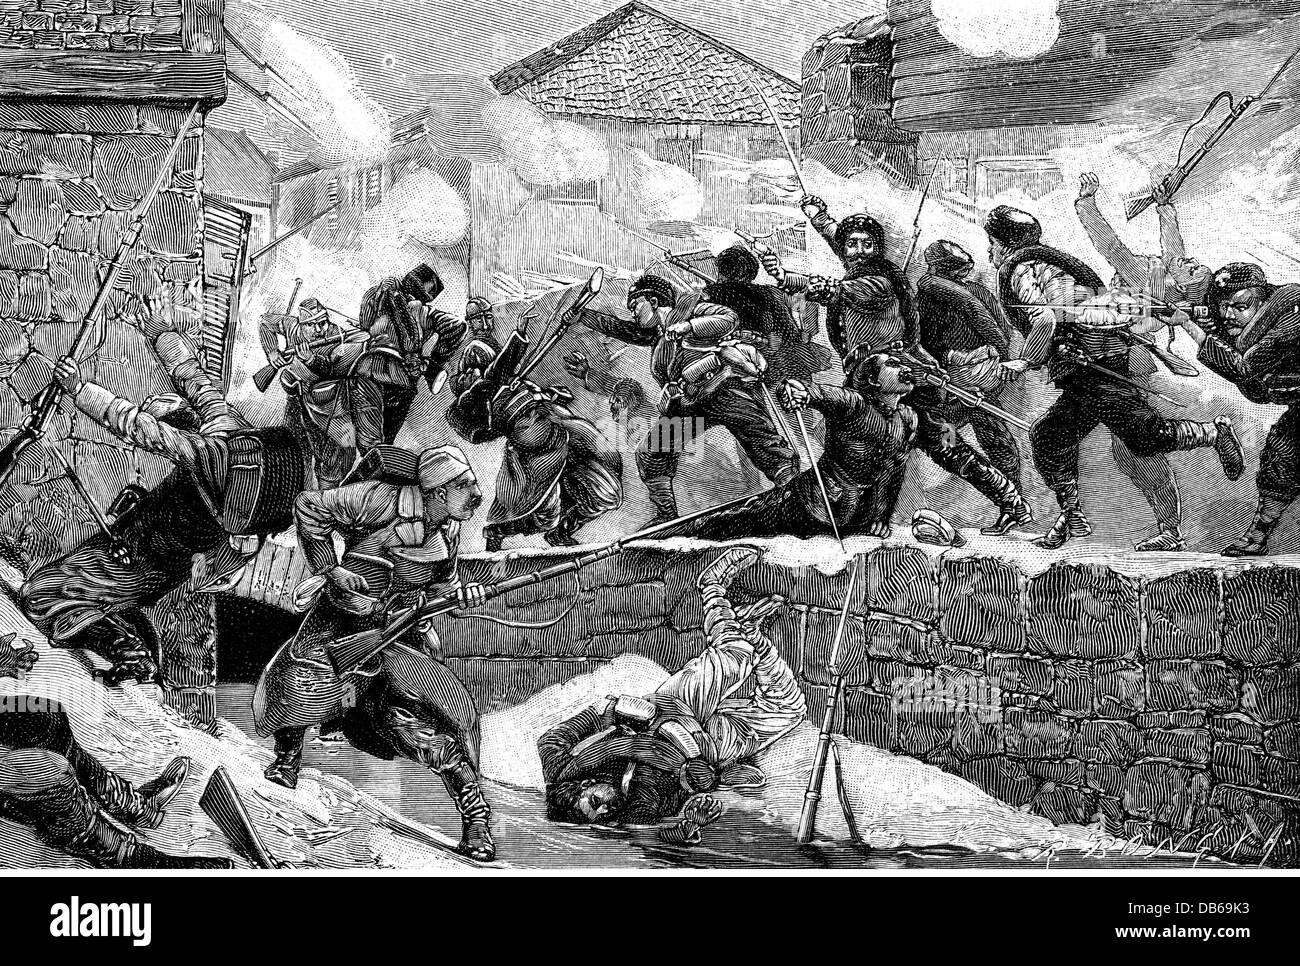 events, Serbo-Bulgarian War 1885 - 1866, Battle of Pirot, 27.11.1885, wood engraving, 1896, Serbo-Bulgarian War, Kingdom of Serbia, Principality of Bulgaria, soldiers, combat, the Balkans, 19th century, historic, historical, people, Additional-Rights-Clearences-Not Available Stock Photo